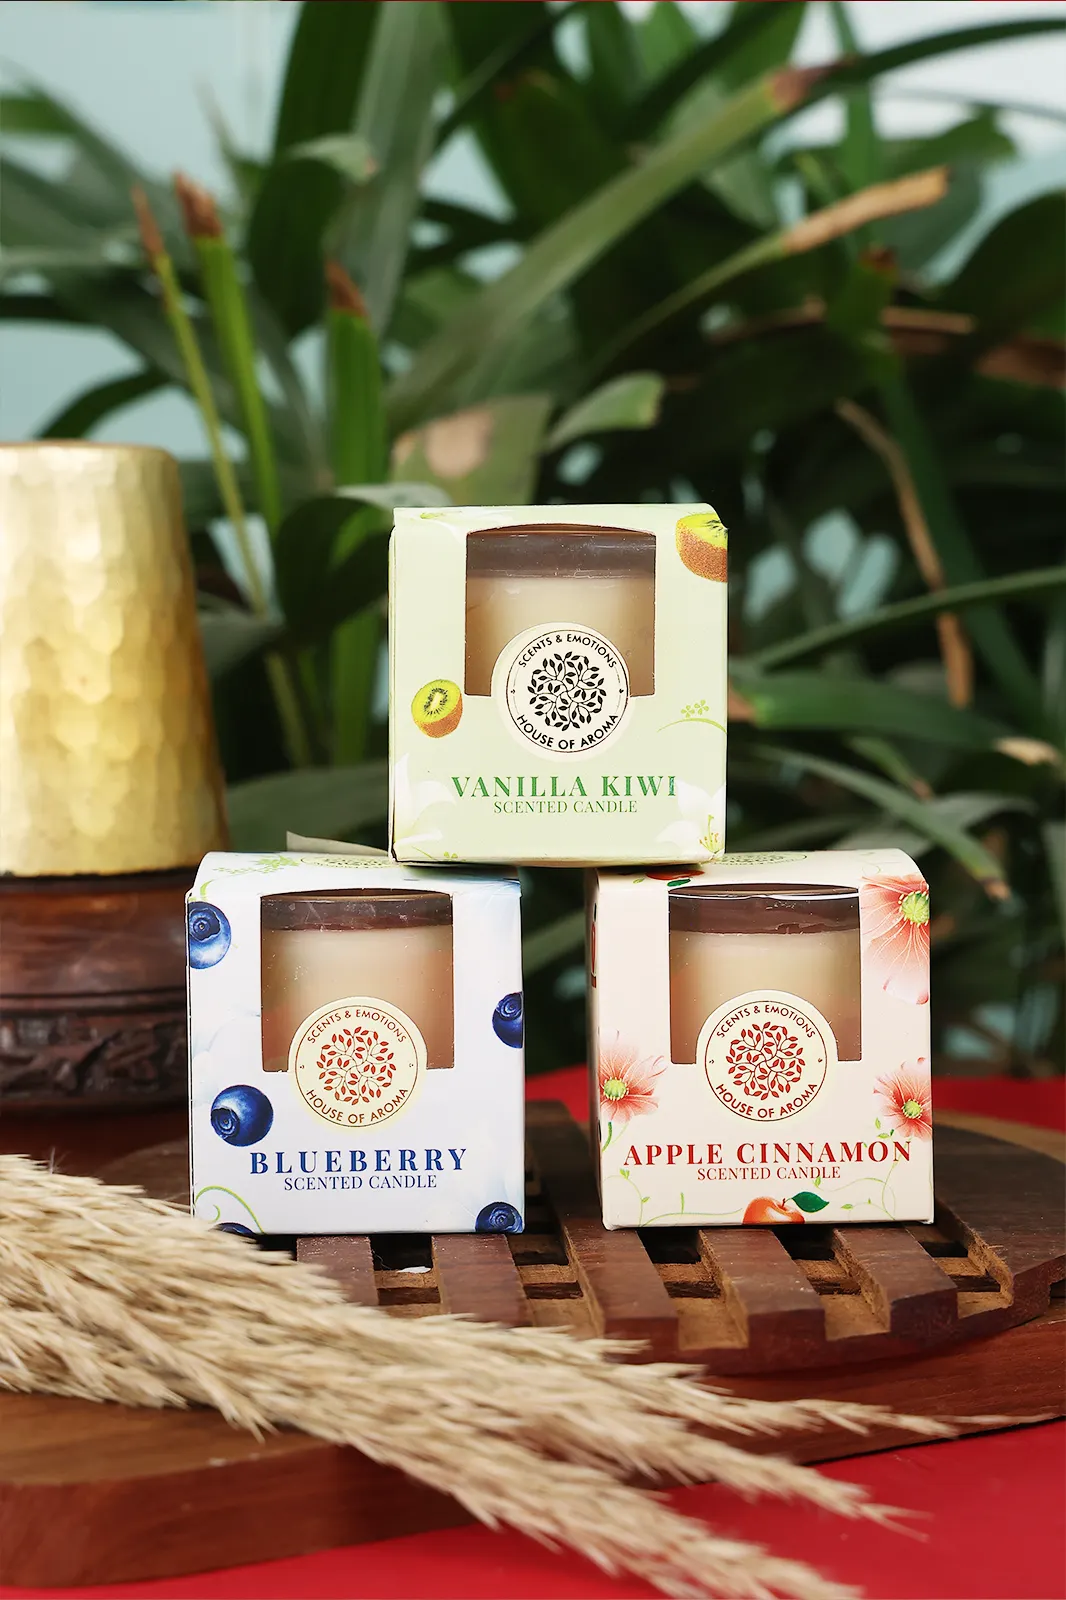 fruit fragrance candles, fragrance candles gift set, scented candles, Scented candles combo, fragrance candle set, home fragrance candles, online scented candles, scented candle online, natural fragrance candles, fragrance candles gift set, blueberry scented candles, vanilla fragrance candle, apple cinnamon candle